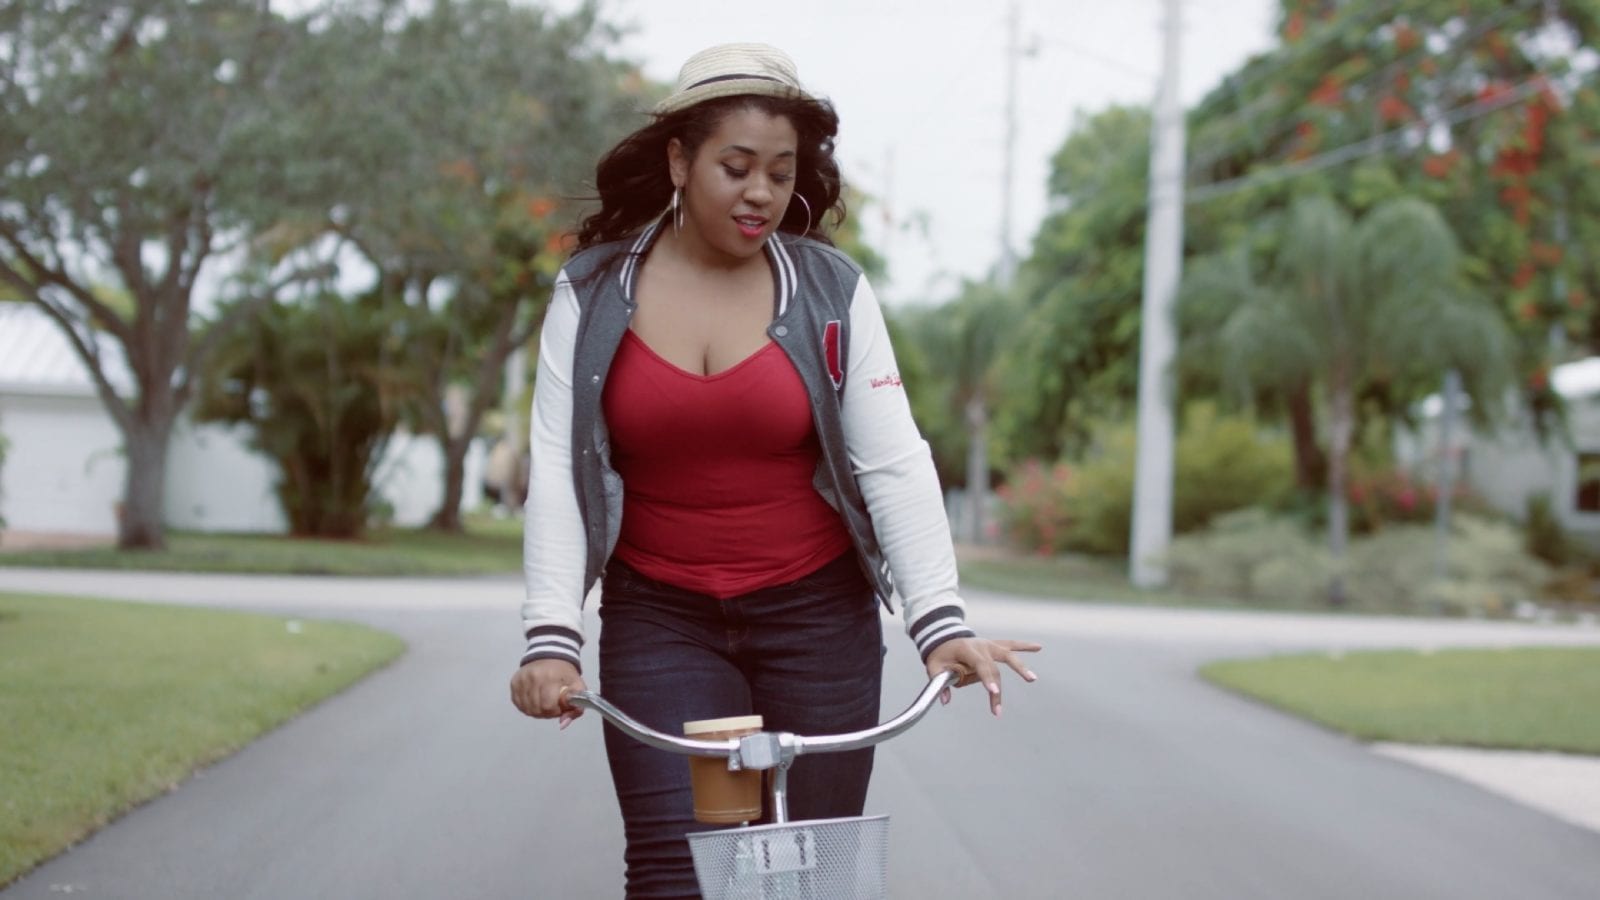 Aymber Easy Official Music Video Woman riding a bicycle wearing a white hat, red shirt, light athletic jacket and blue jeans.